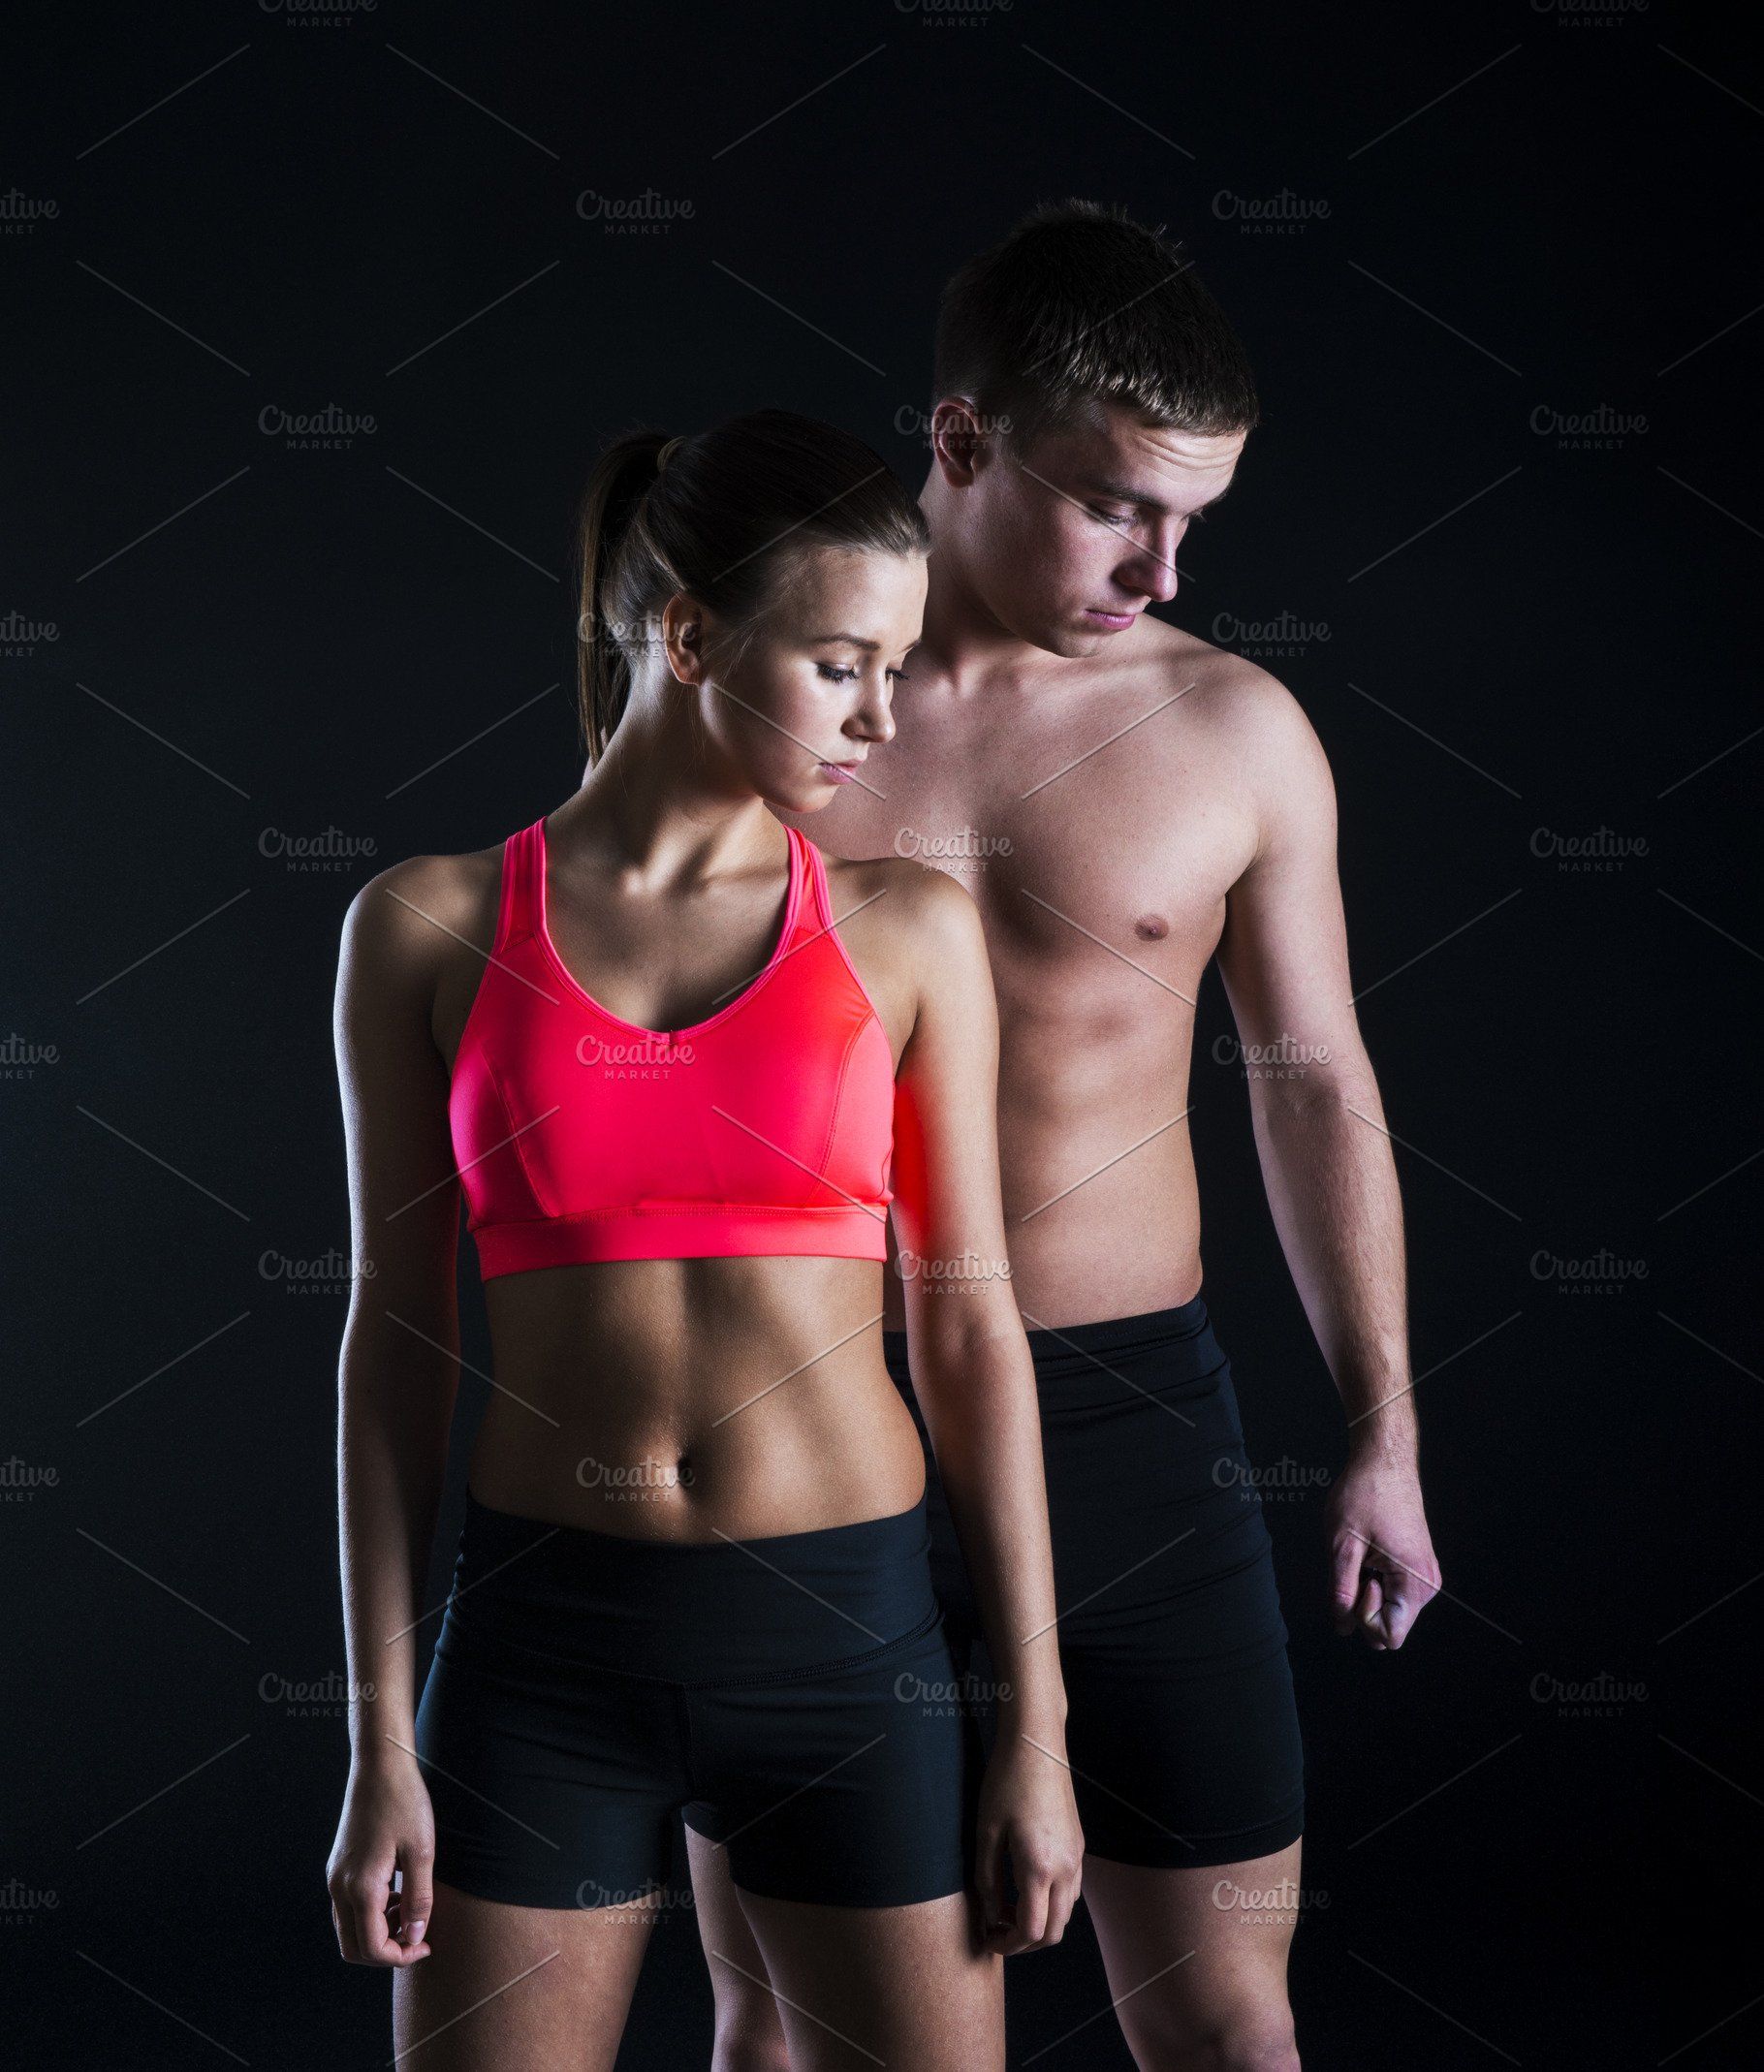 Fitness Couple. High Quality People Image Creative Market